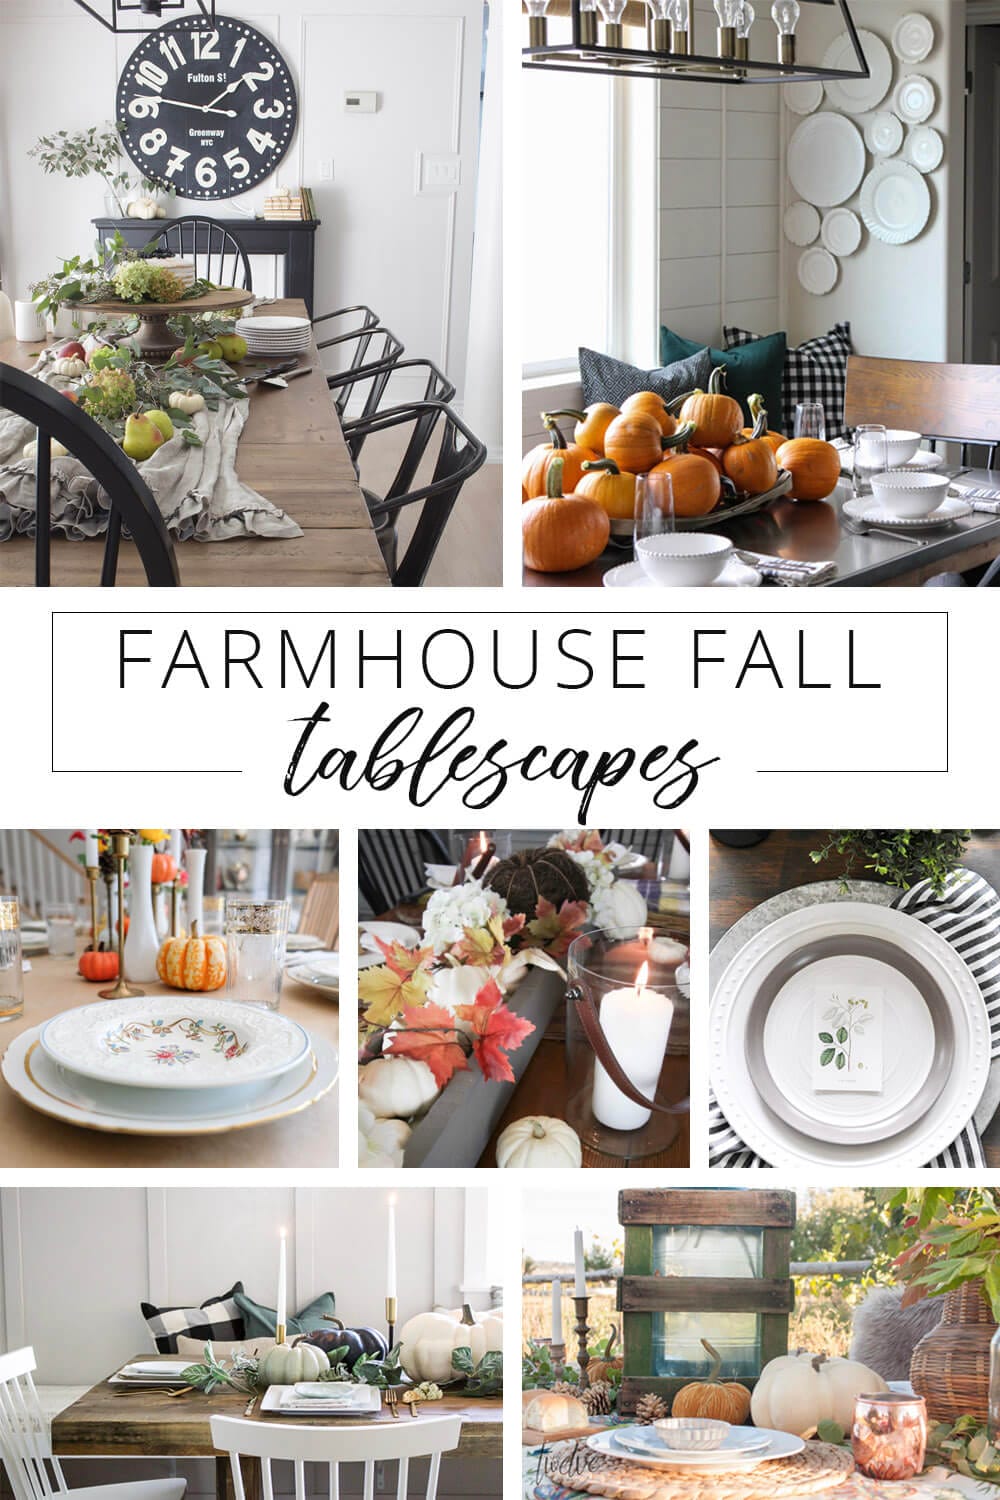 How to Rock an Outdoor Fall Table - Twelve On Main